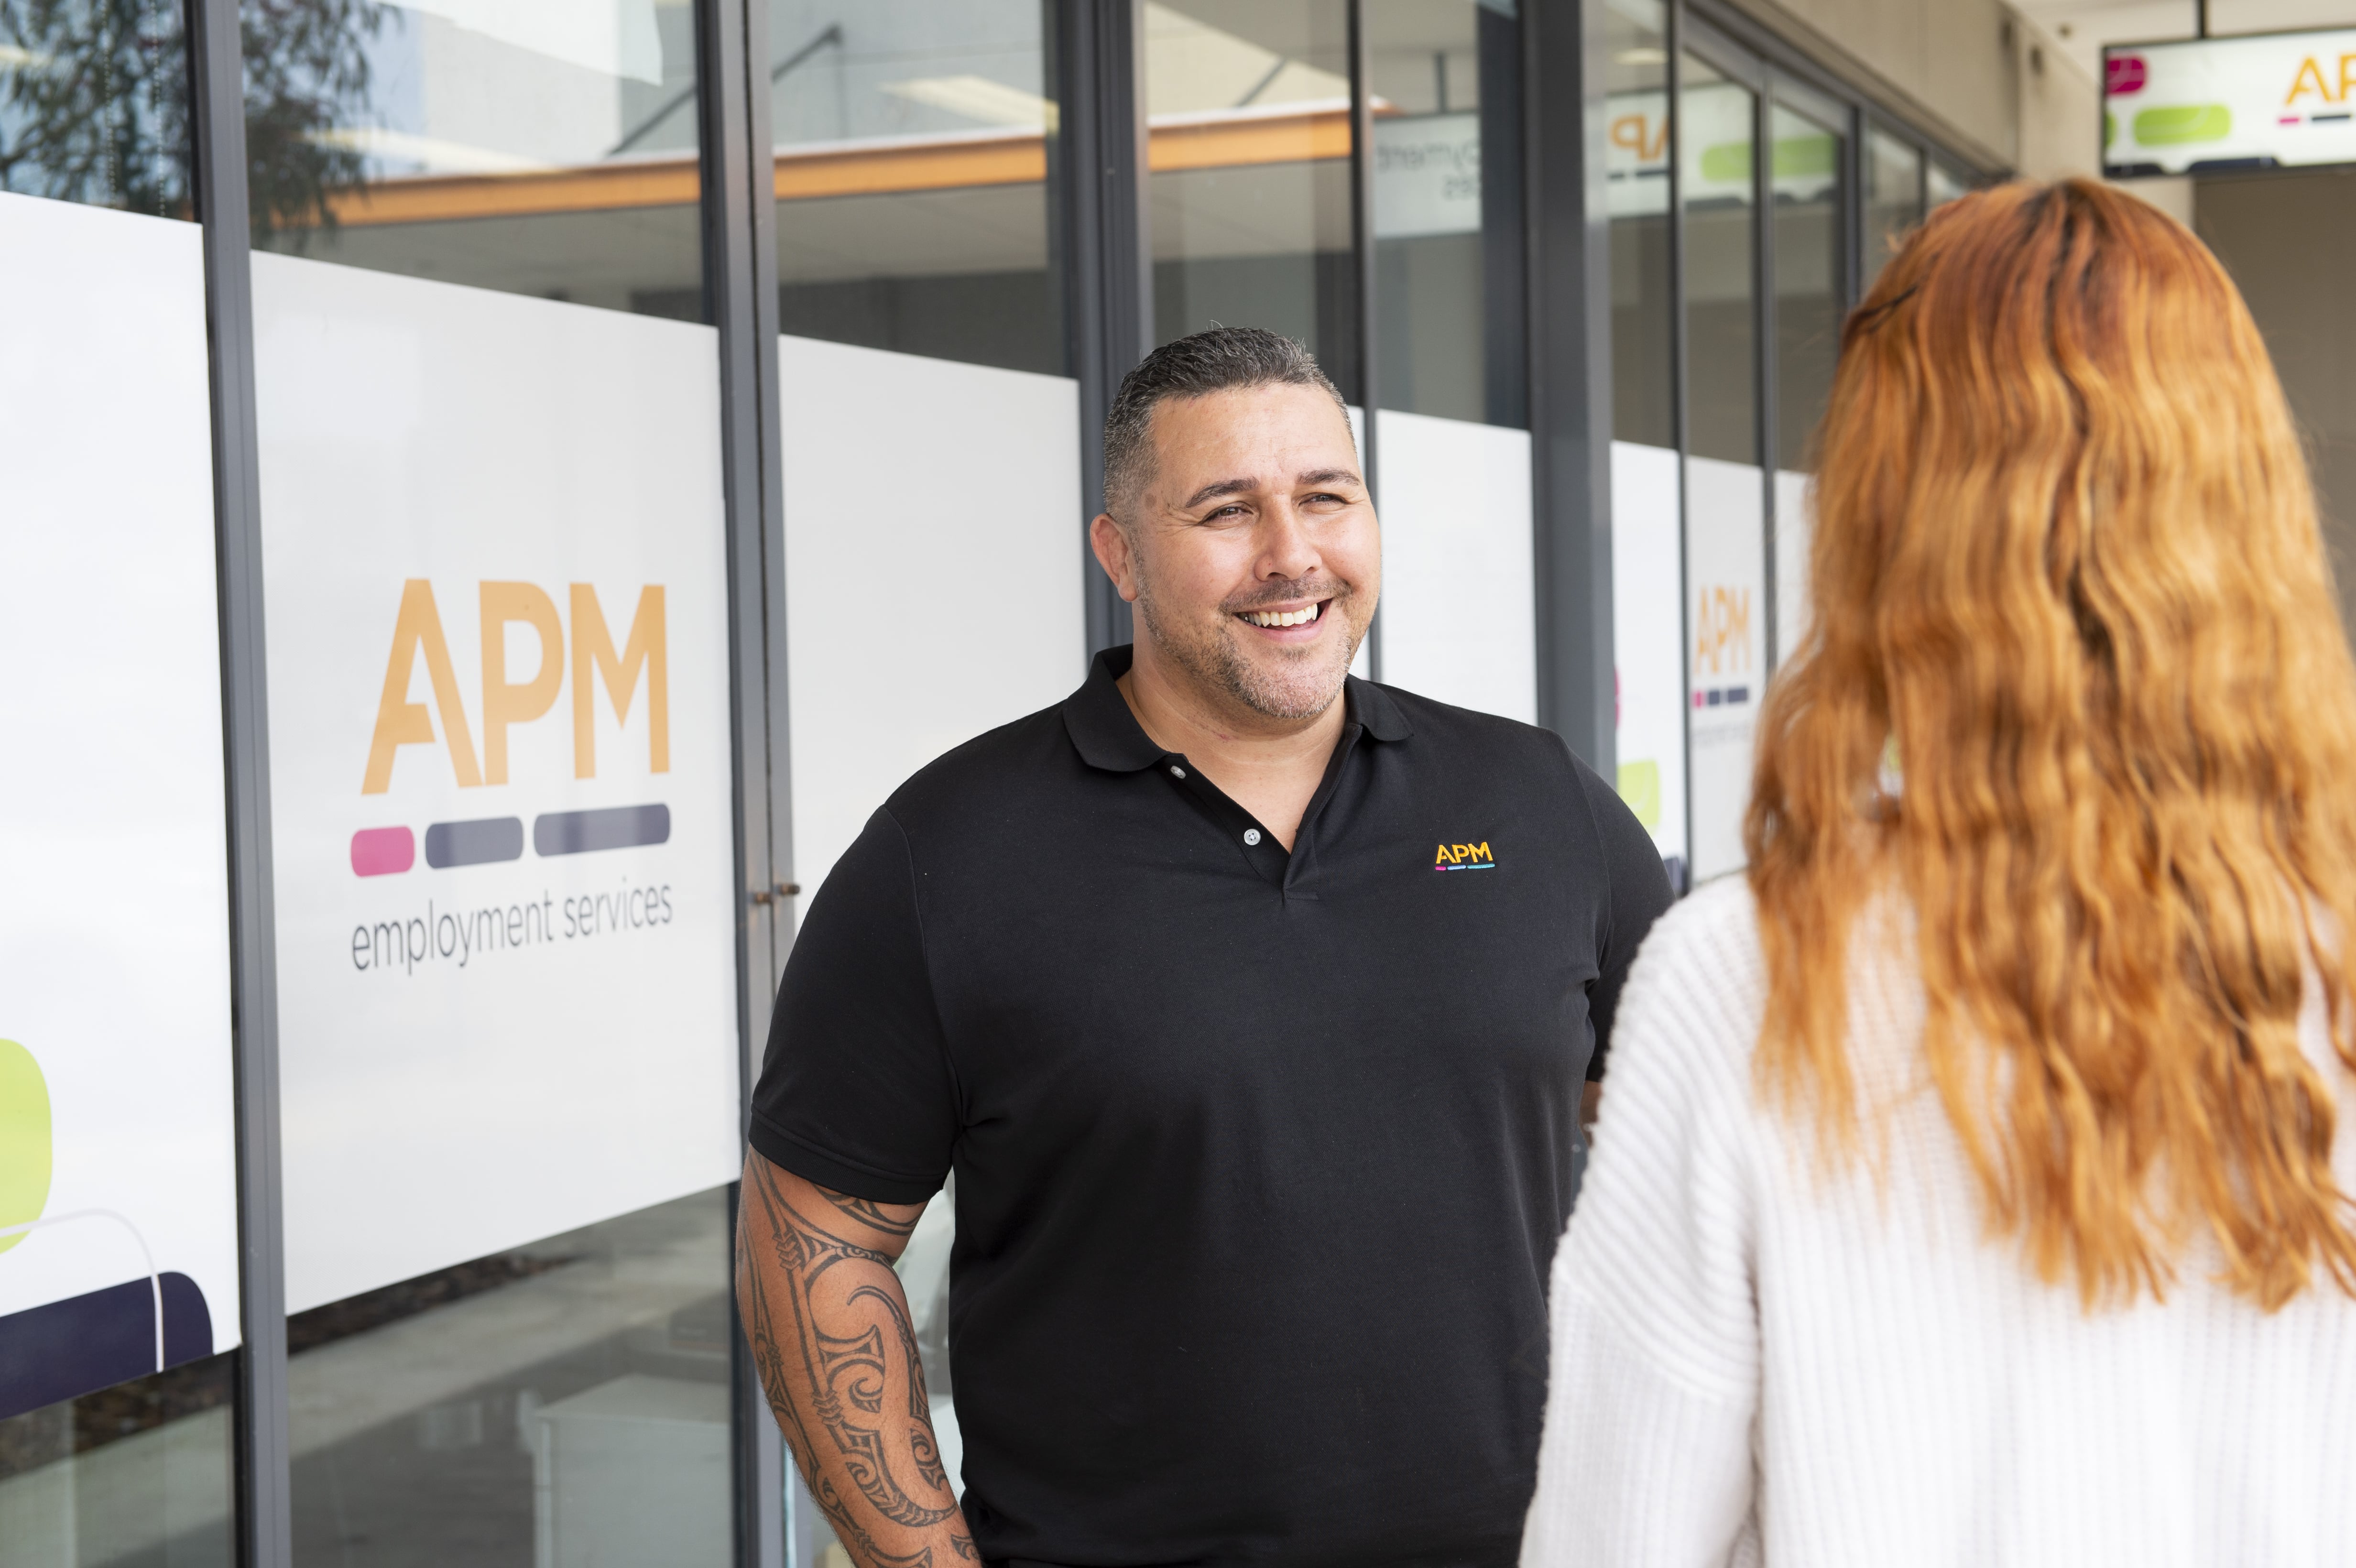 APM Employment Consultant Steve talks to a job seeker with disability